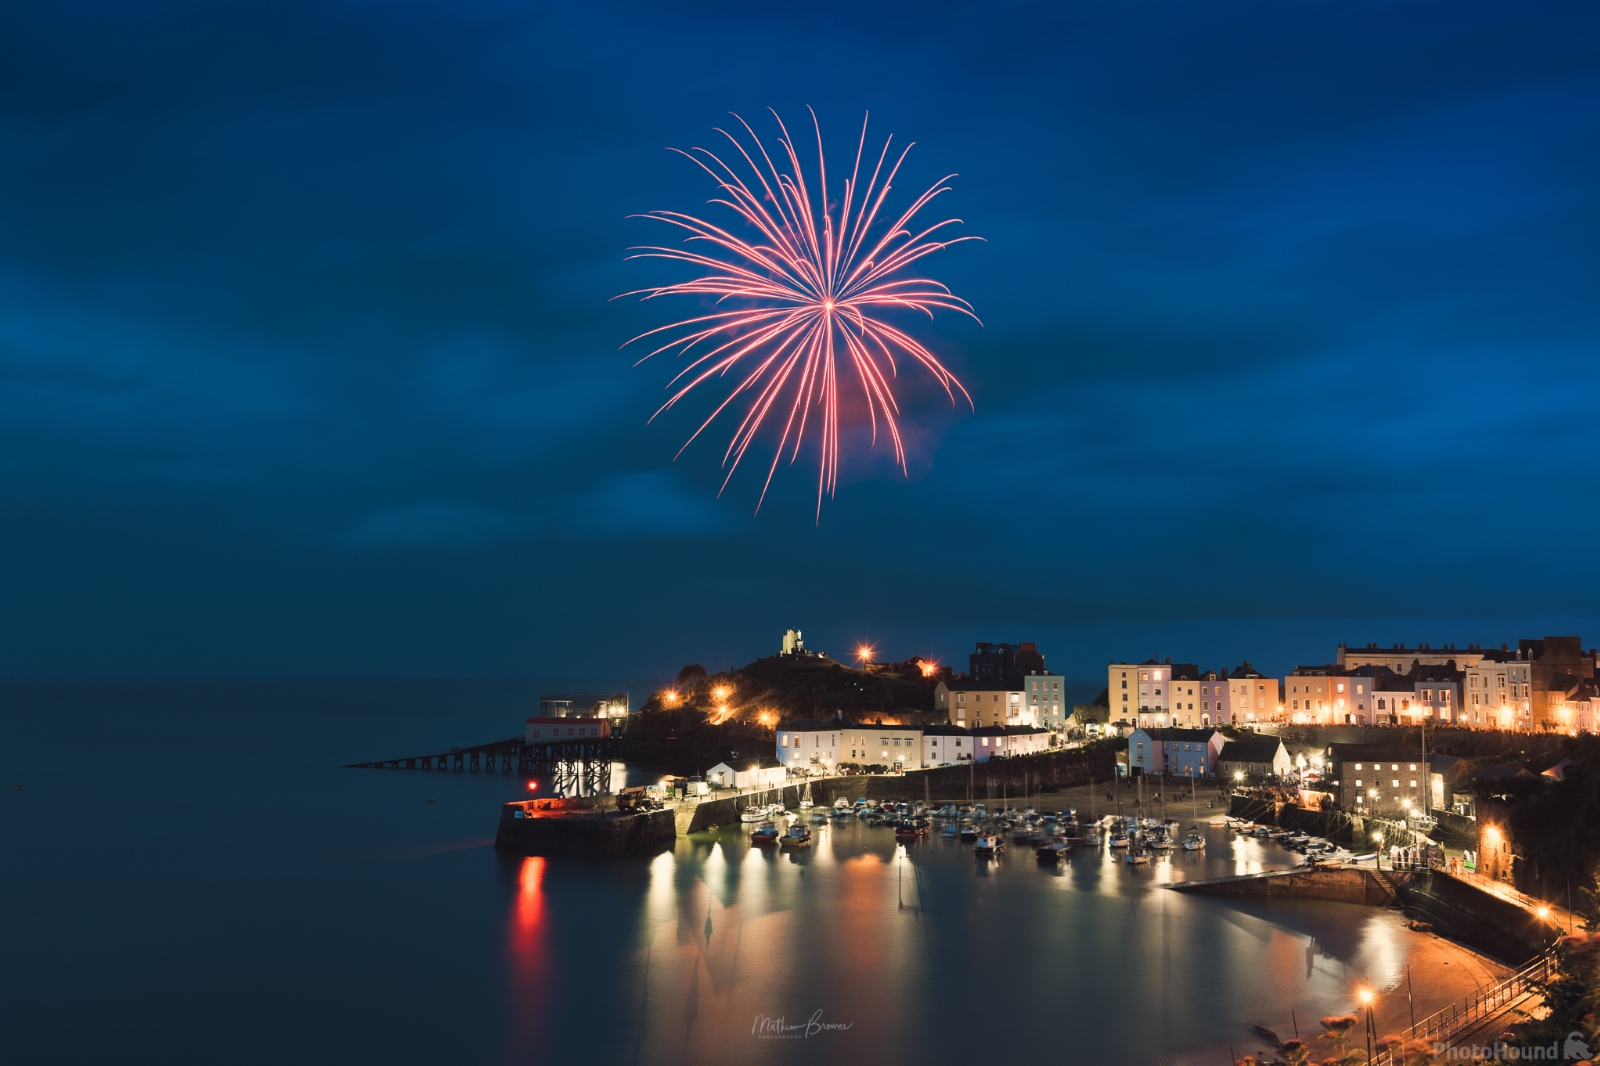 Image of Fireworks at Tenby Harbour by Mathew Browne